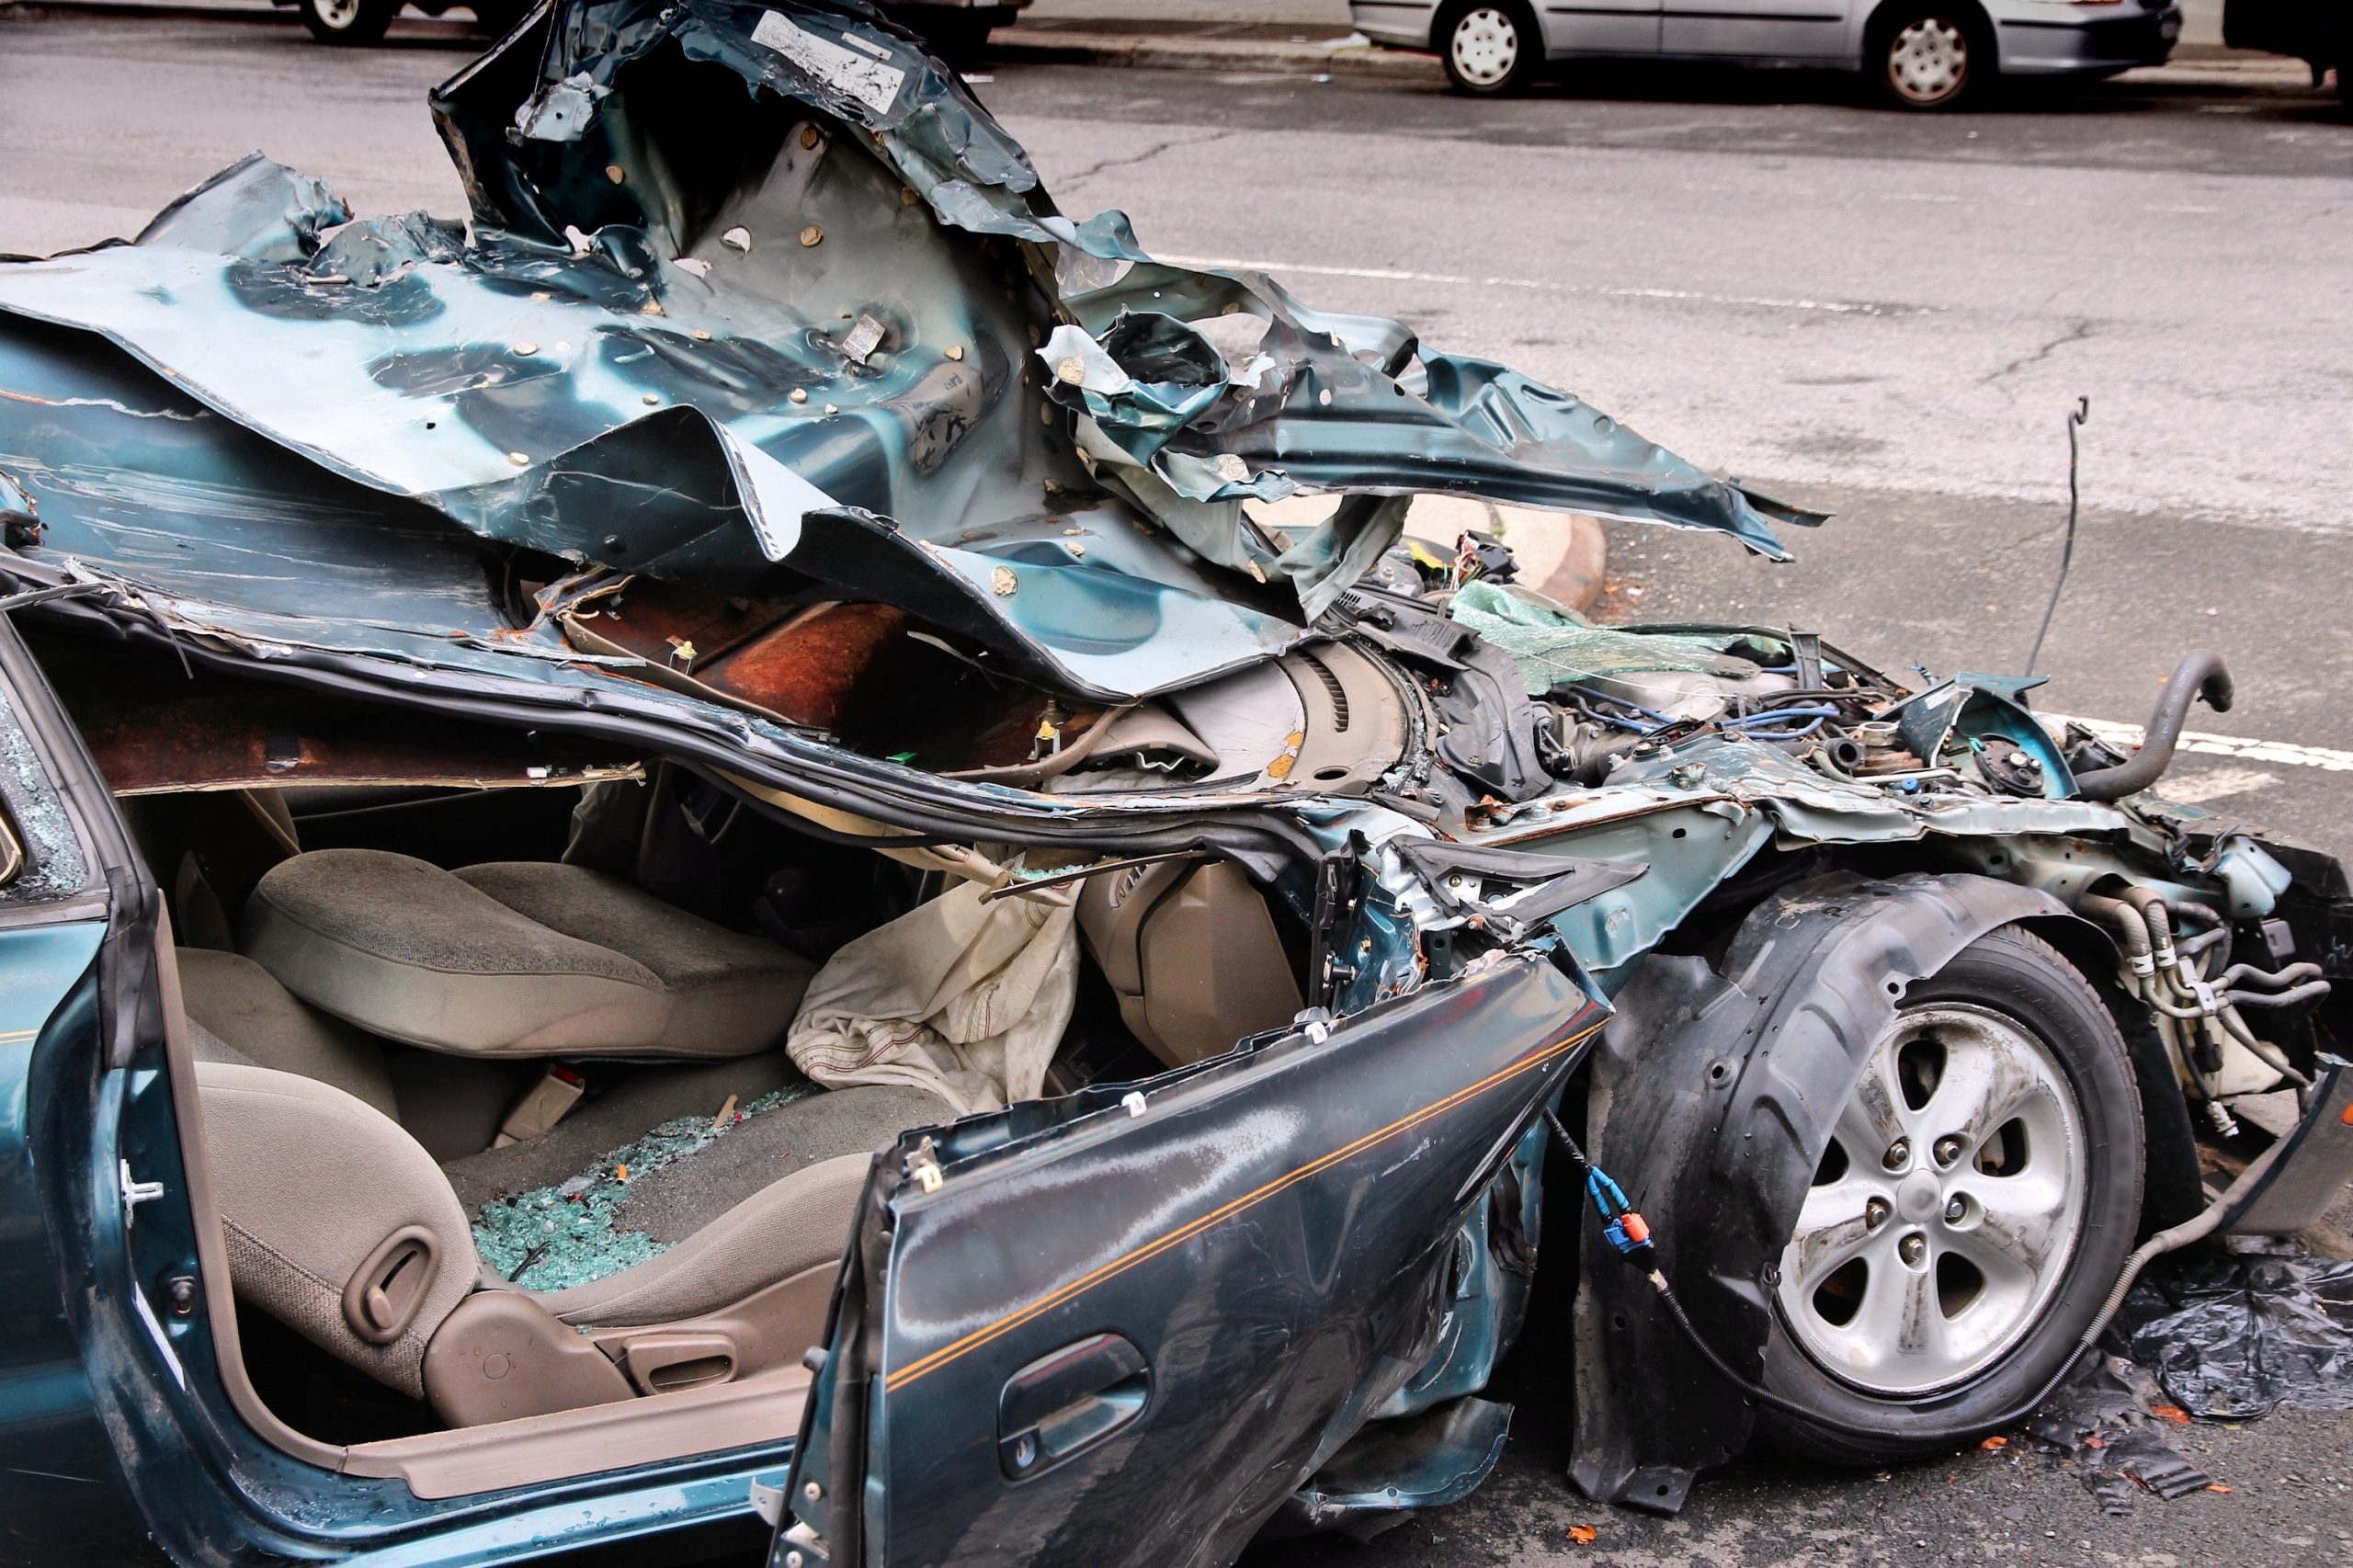 How To Get the Most Money From Insurance for Totaled Car